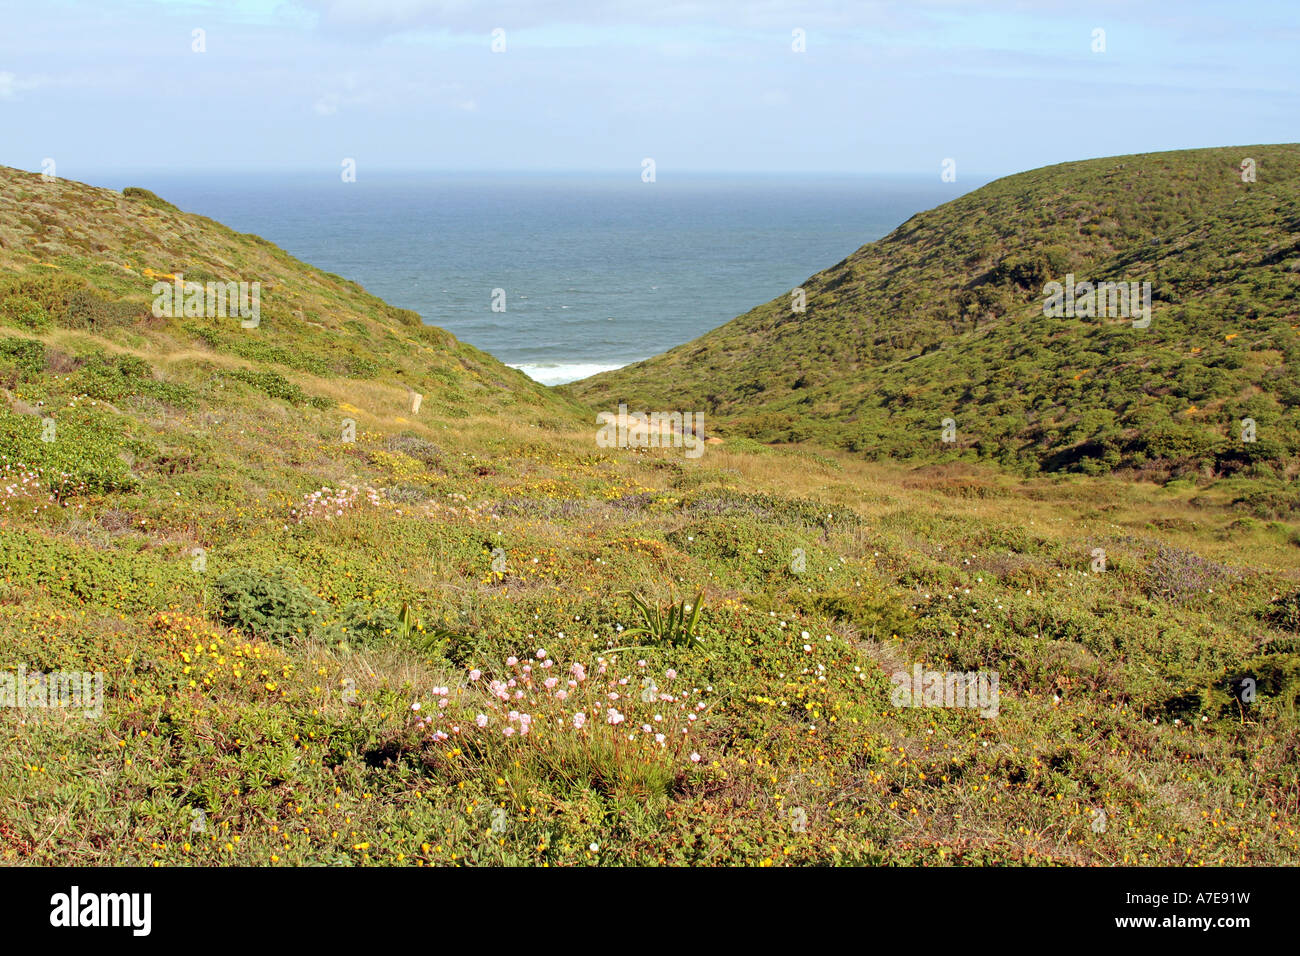 Spring landscape and lonely coast Costa Vicentina Nature Reserve Sagres Algarve Portugal Europe Stock Photo